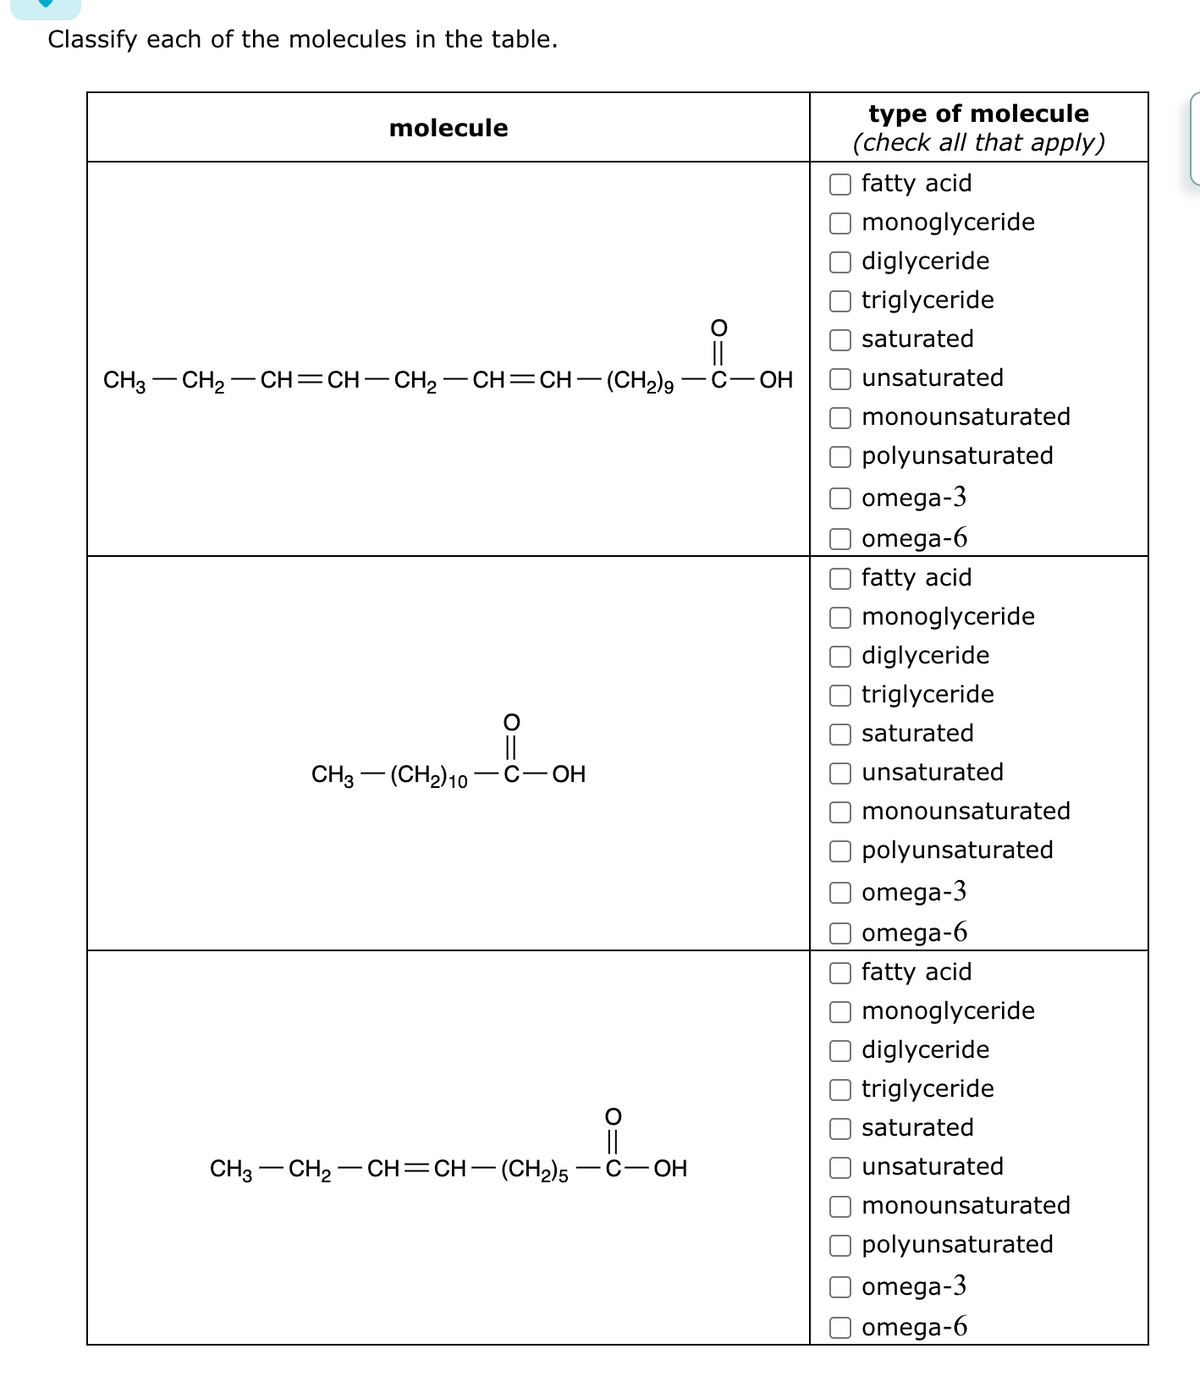 Classify each of the molecules in the table.
molecule
CH3 CH₂-CH=CH-CH₂-CH=CH-(CH₂)9
CH3-(CH₂) 10
i
- OH
CH3–CH2–CH=CH−(CH2)5 -OH
O=O
C-OH
type of molecule
(check all that apply)
fatty acid
monoglyceride
diglyceride
triglyceride
saturated
unsaturated
monounsaturated
polyunsaturated
omega-3
omega-6
fatty acid
monoglyceride
diglyceride
triglyceride
saturated
unsaturated
monounsaturated
polyunsaturated
omega-3
omega-6
fatty acid
monoglyceride
diglyceride
triglyceride
saturated
unsaturated
monounsaturated
polyunsaturated
omega-3
omega-6